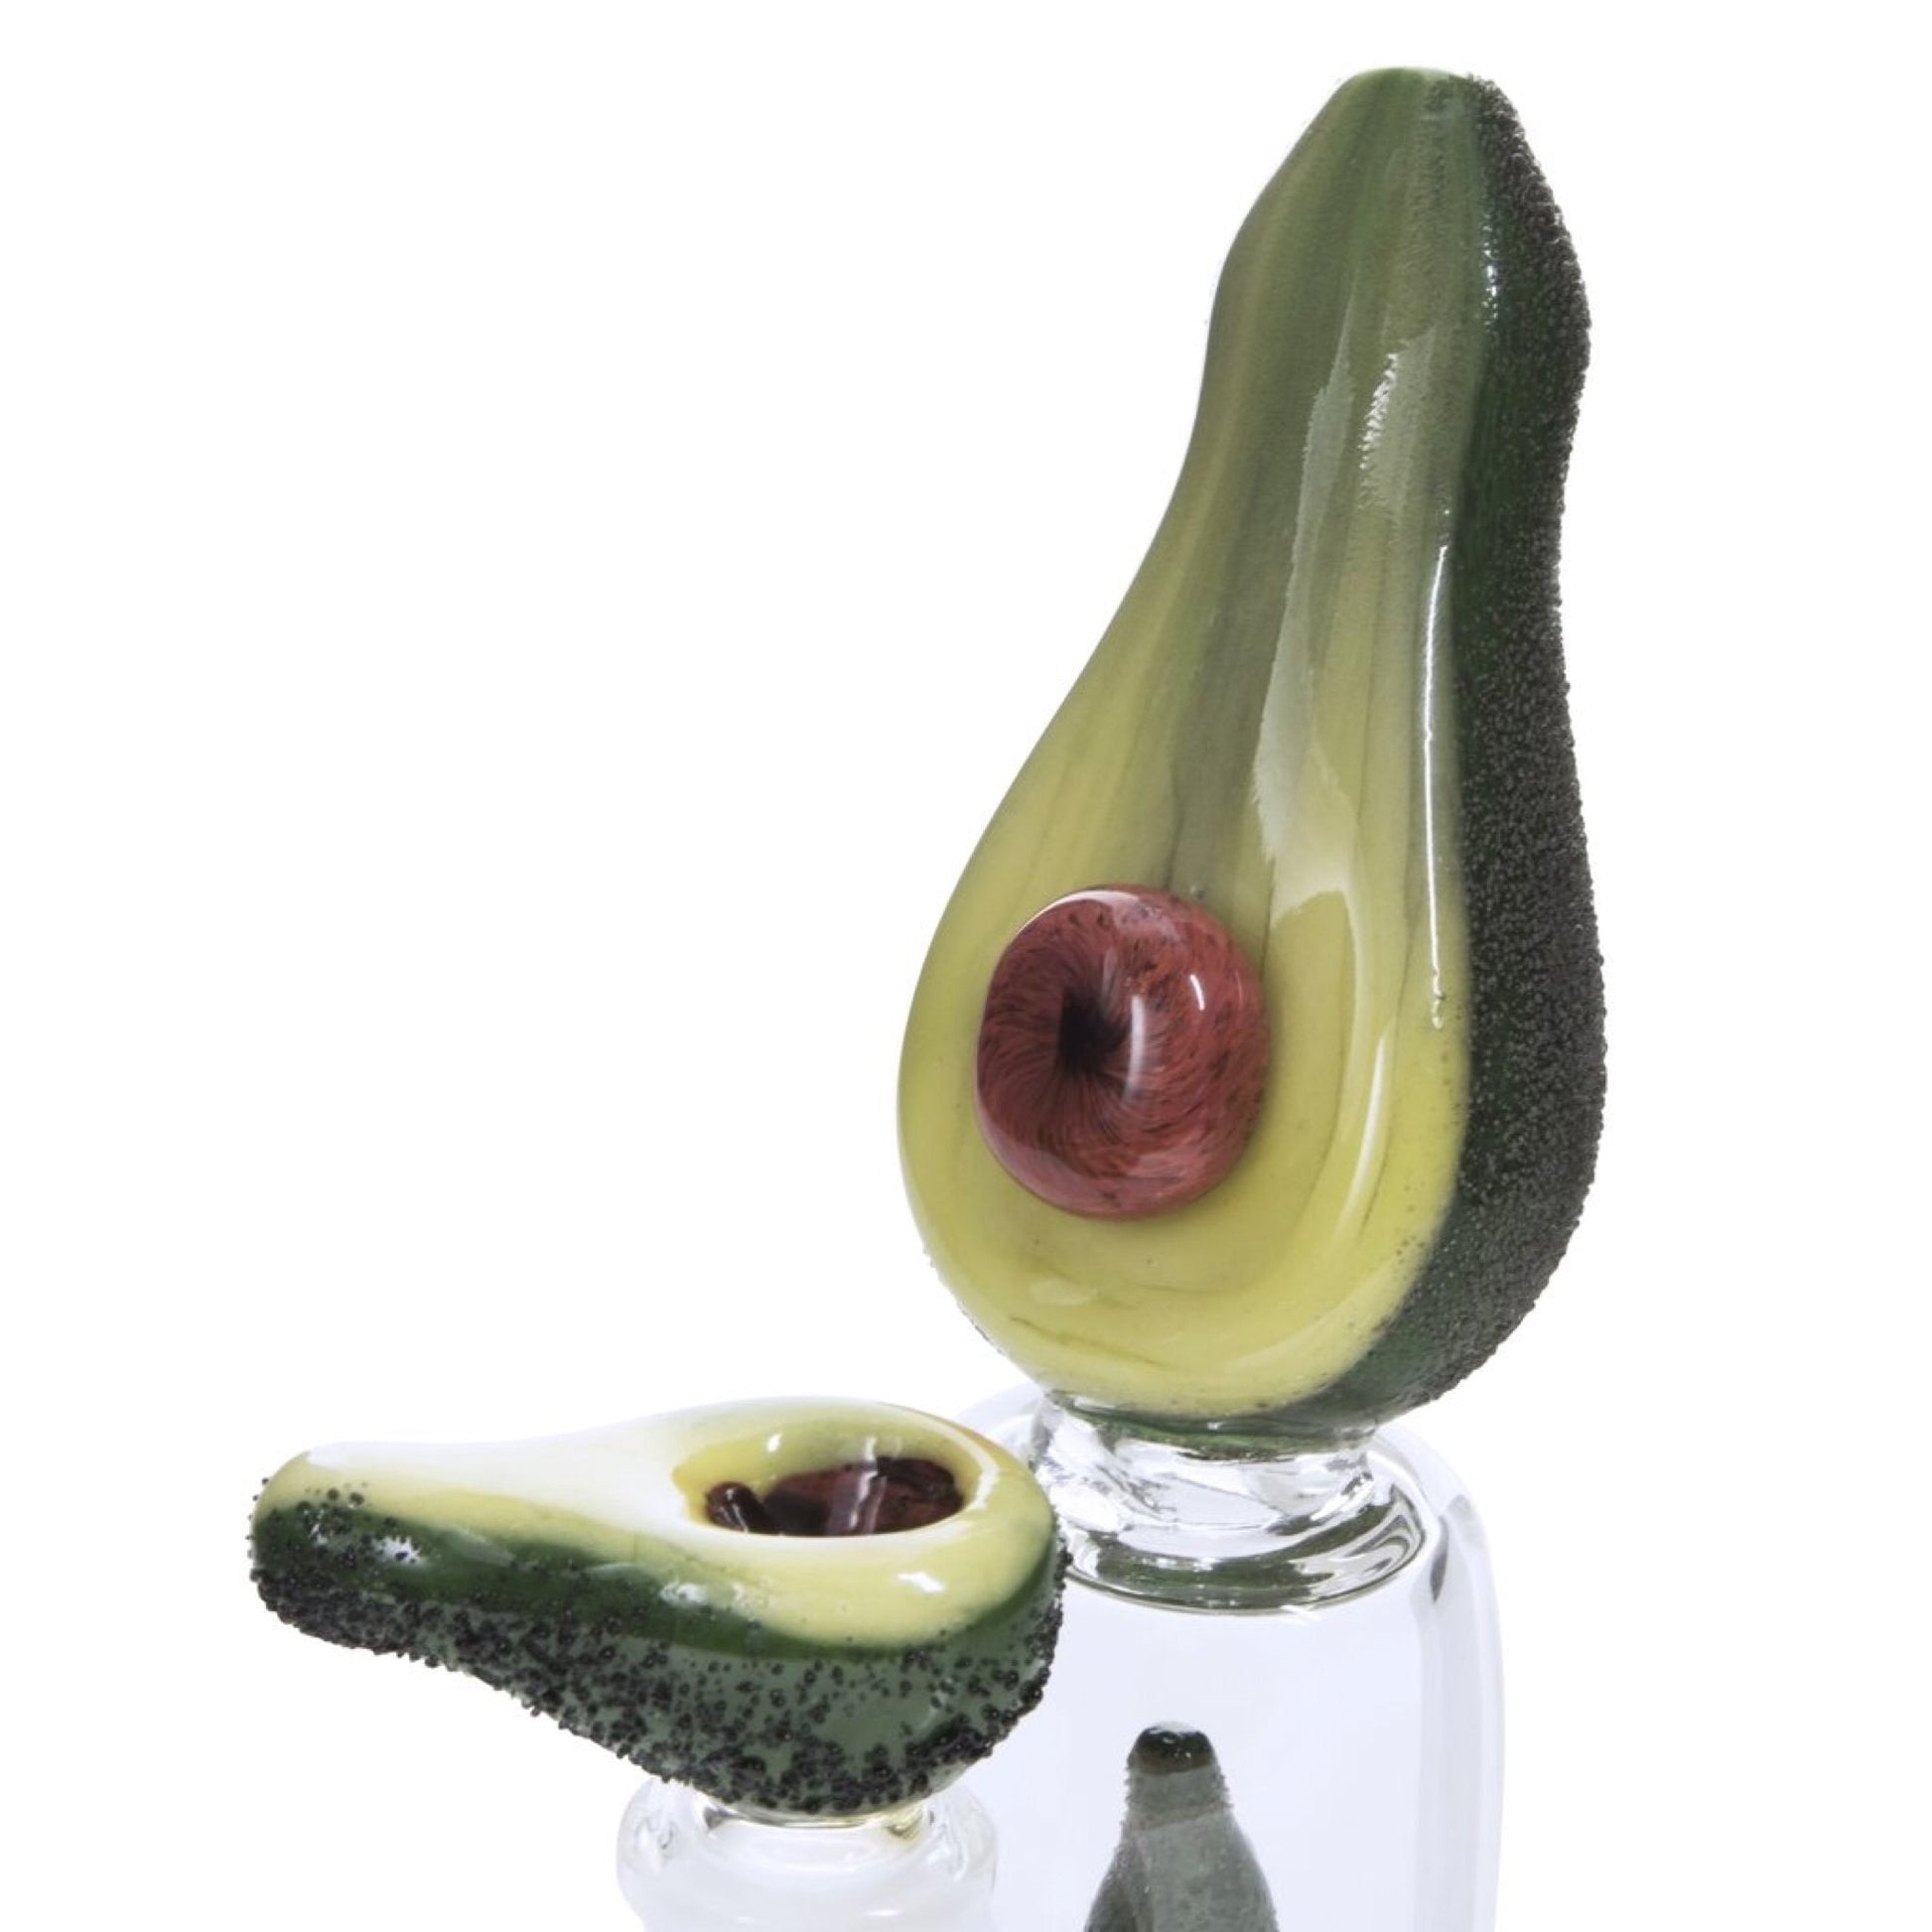 Empire Glassworks “Avocadope” Water Pipe 🥑 